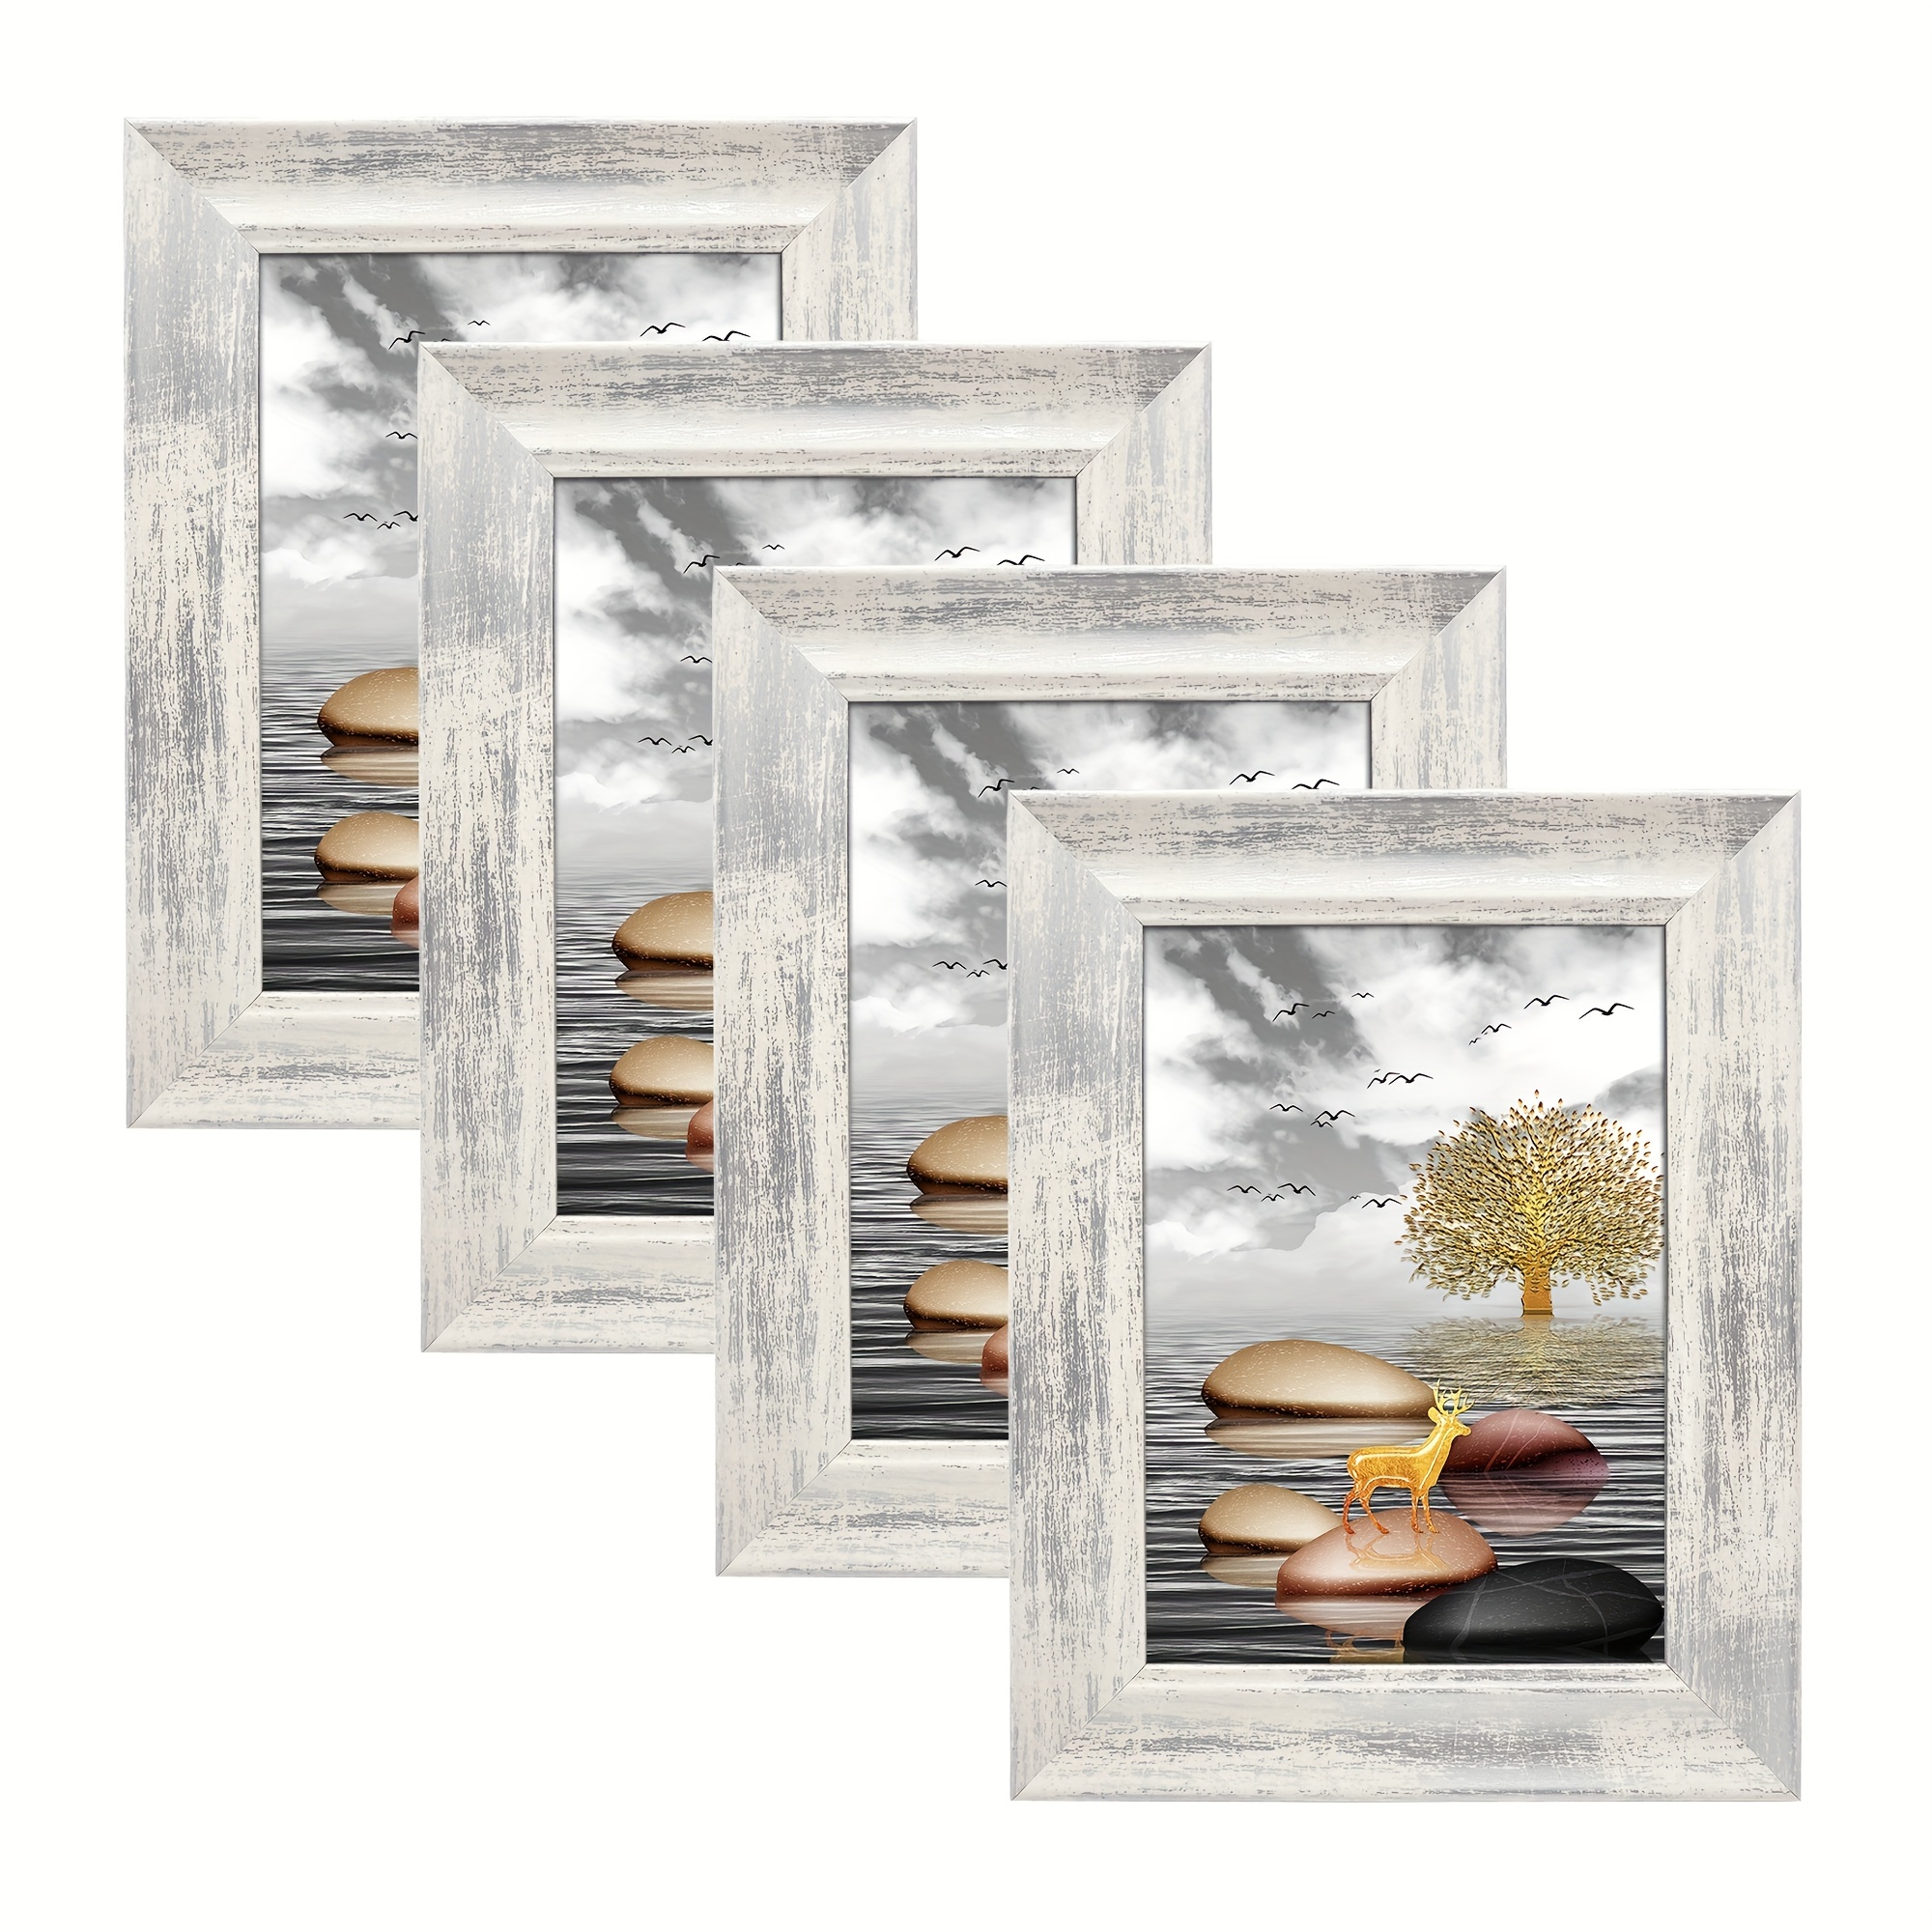 4x6 inch Picture Frames Made of Solid Wood and HD Glass Display